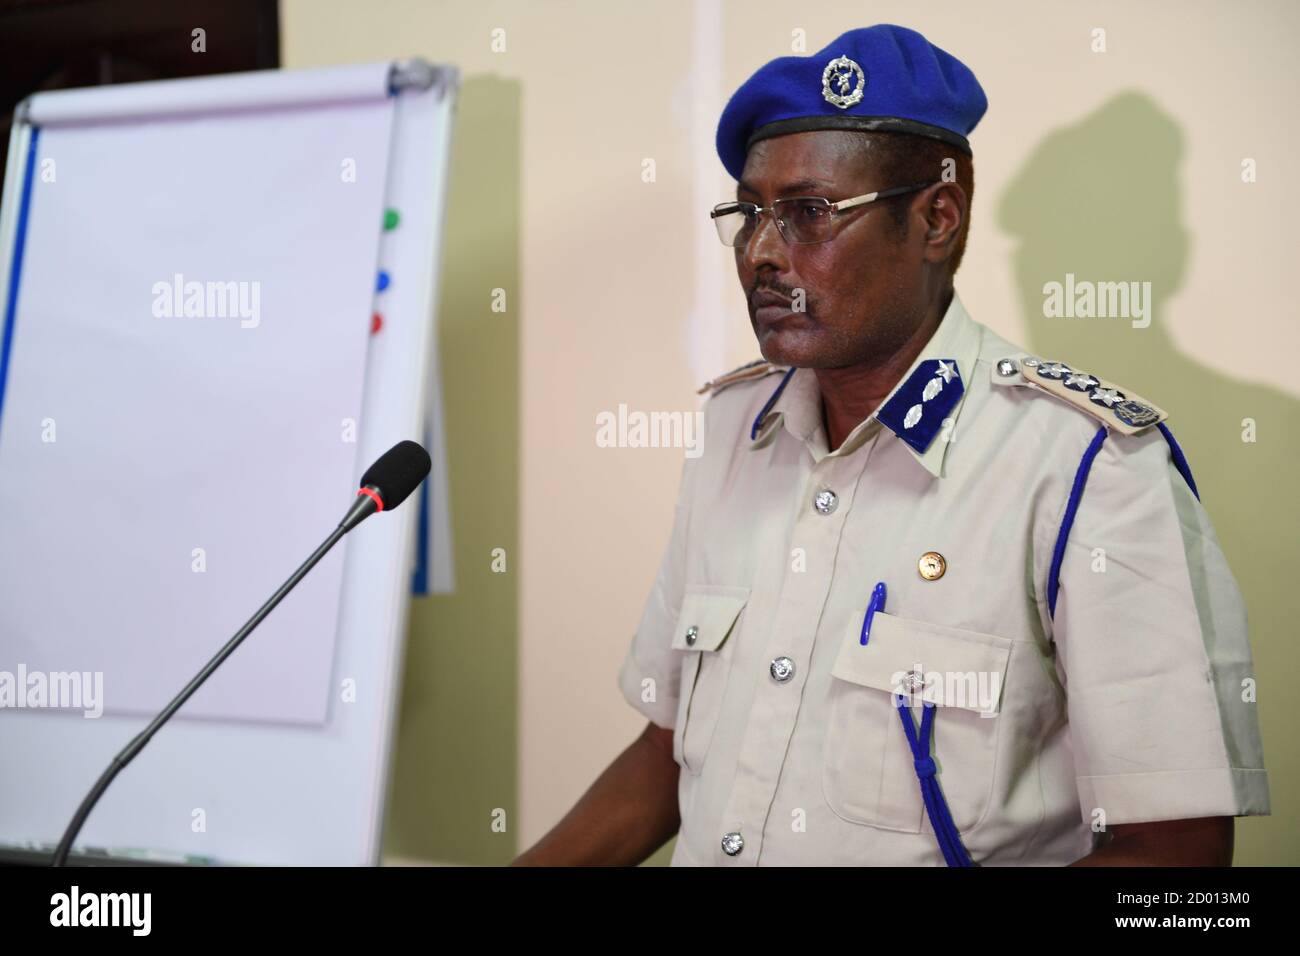 Gen. Hassan Alasow Mohamed, Director of Training and Planning for the Somali Police Force (SPF) addresses participants during a training workshop on Media and Public Relations for Somali police officers in Mogadishu, Somalia on May 07, 2018. Stock Photo